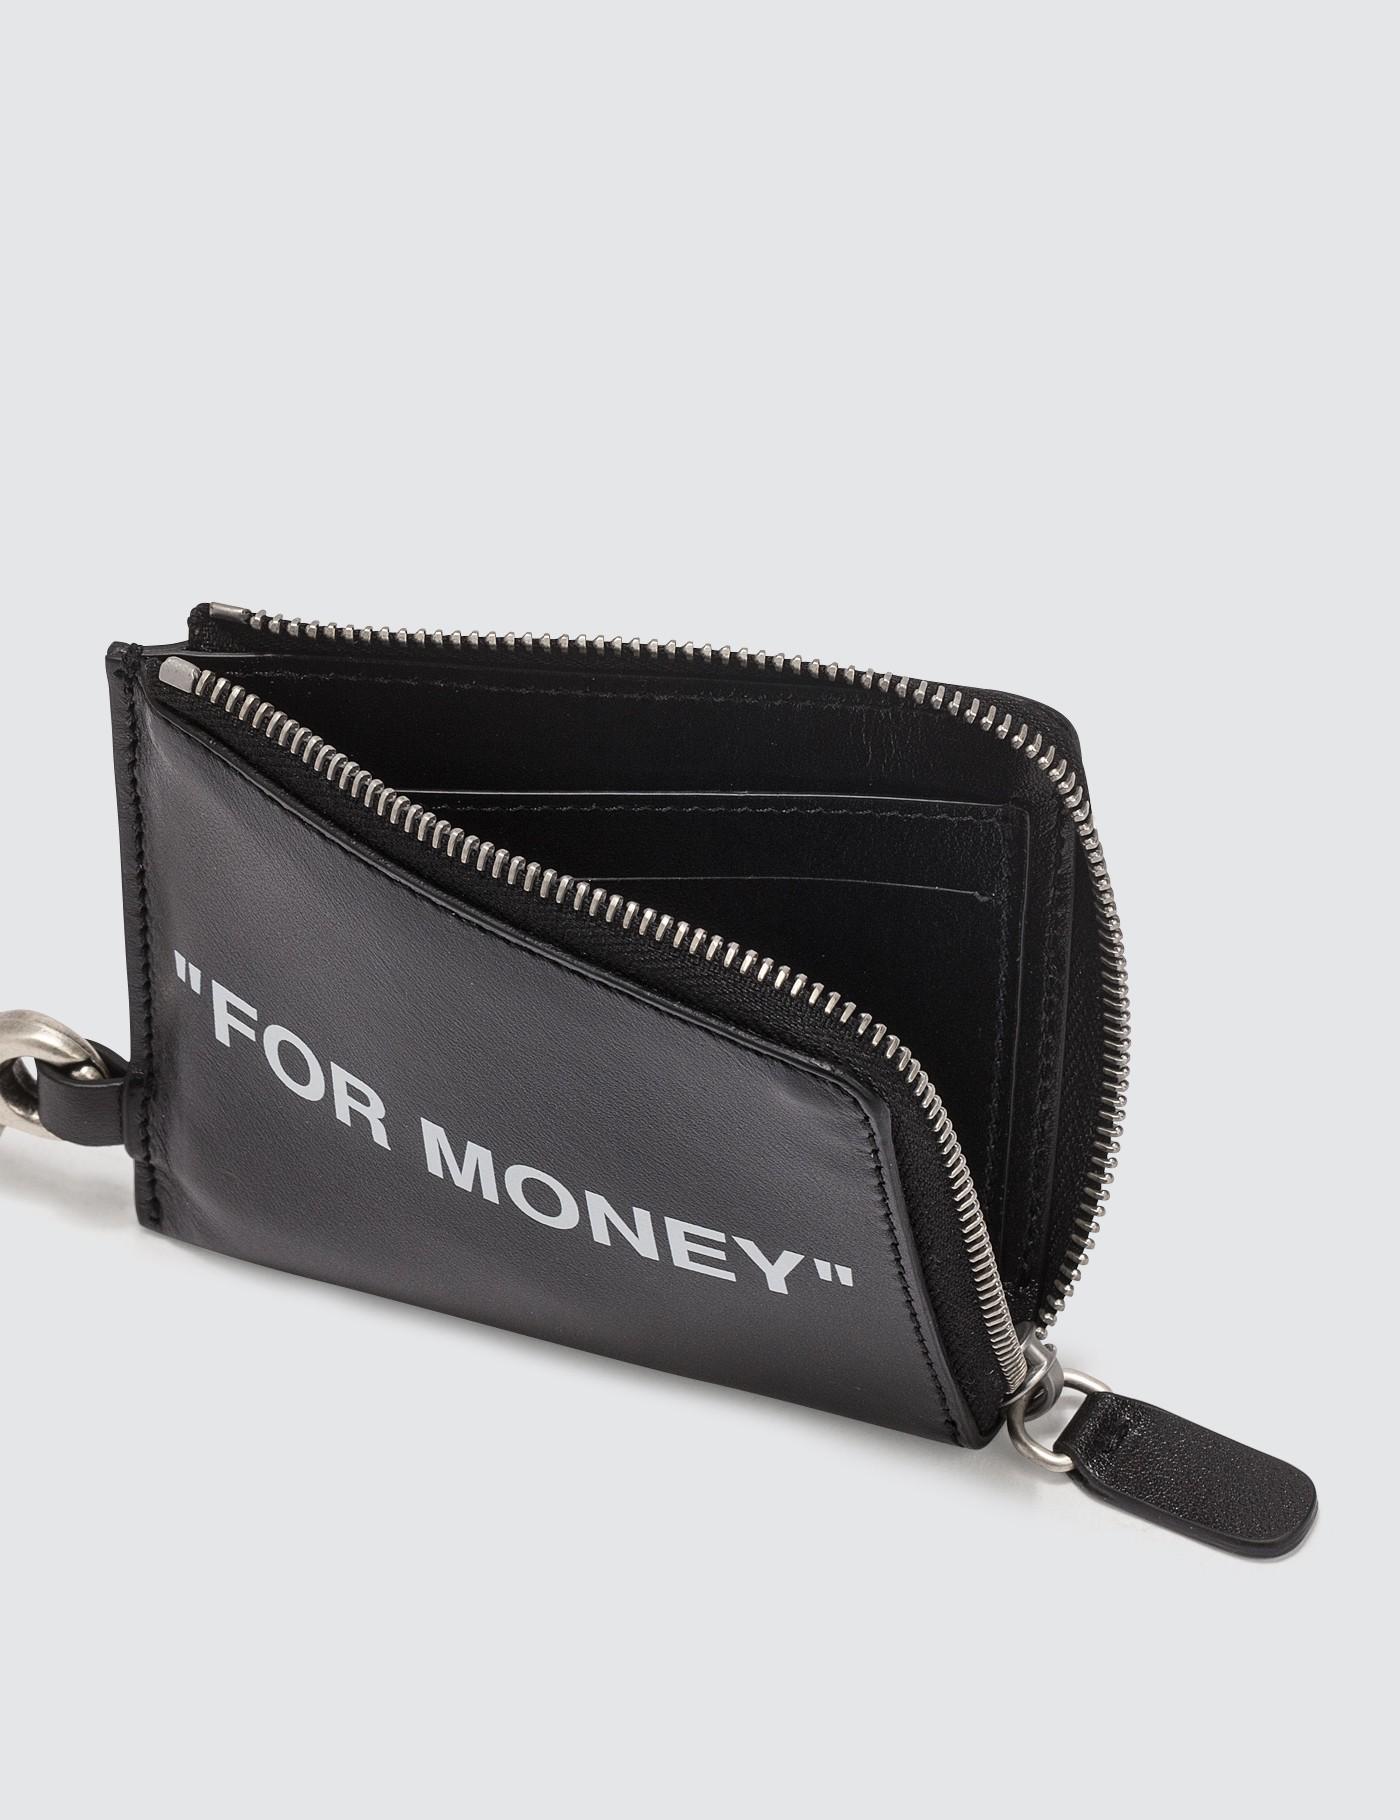 Off-White c/o Virgil Abloh Leather Quote Chain Wallet in Black for Men - Lyst